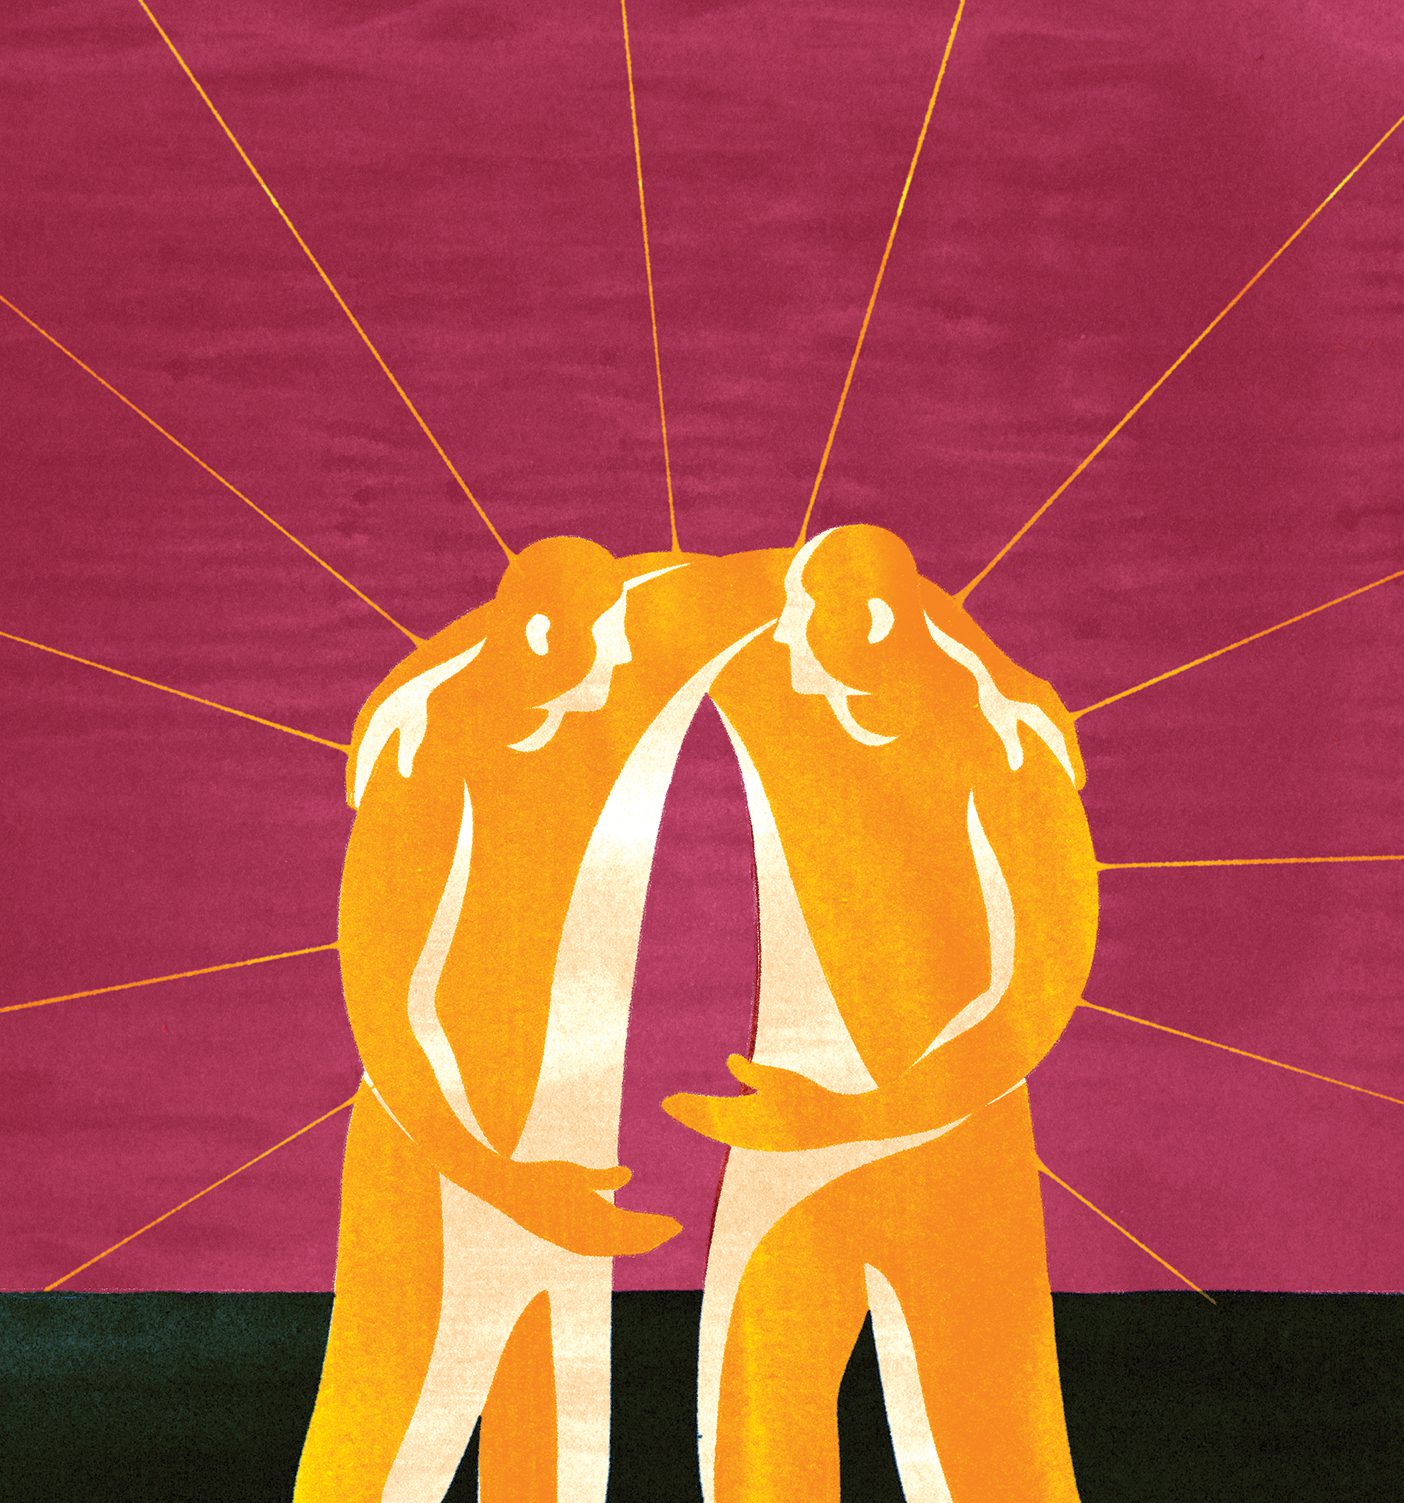 An illustration of two men embracing.